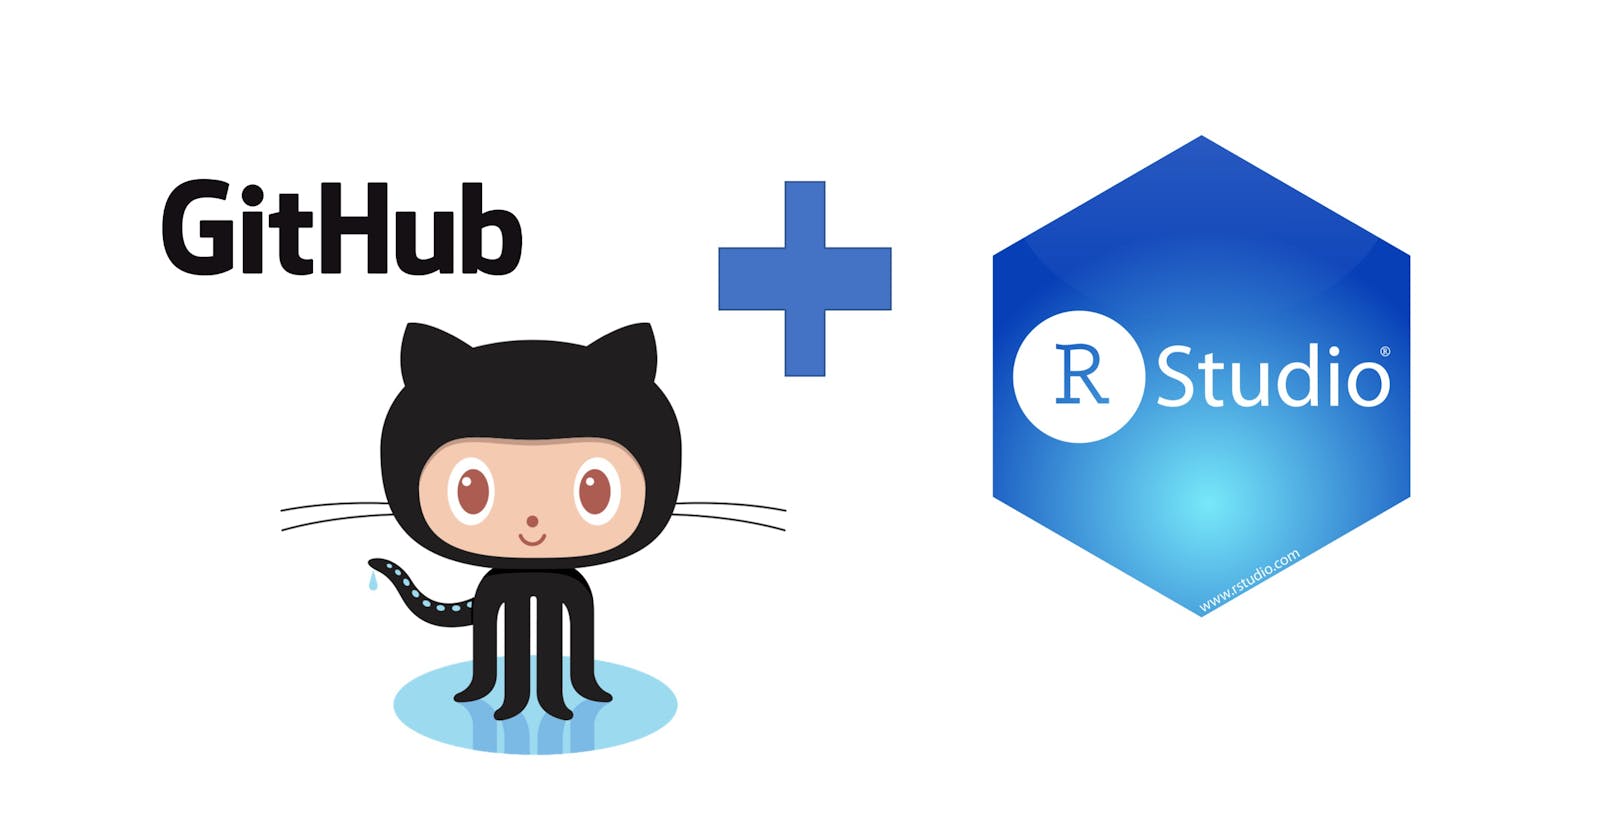 How to push your project to GitHub from RStudio